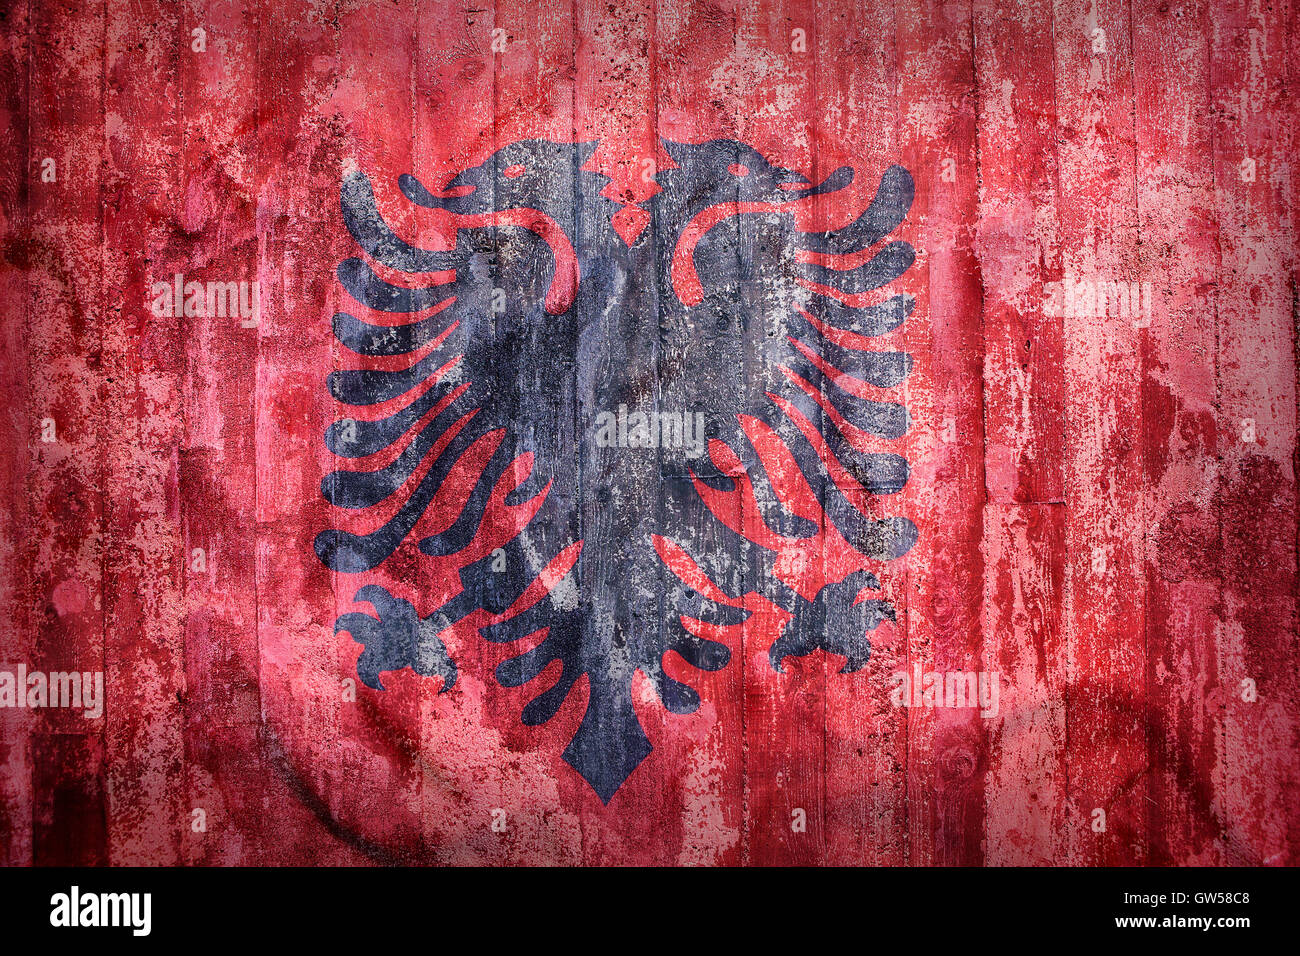 Grunge style of Albania flag on a brick wall for background Stock Photo